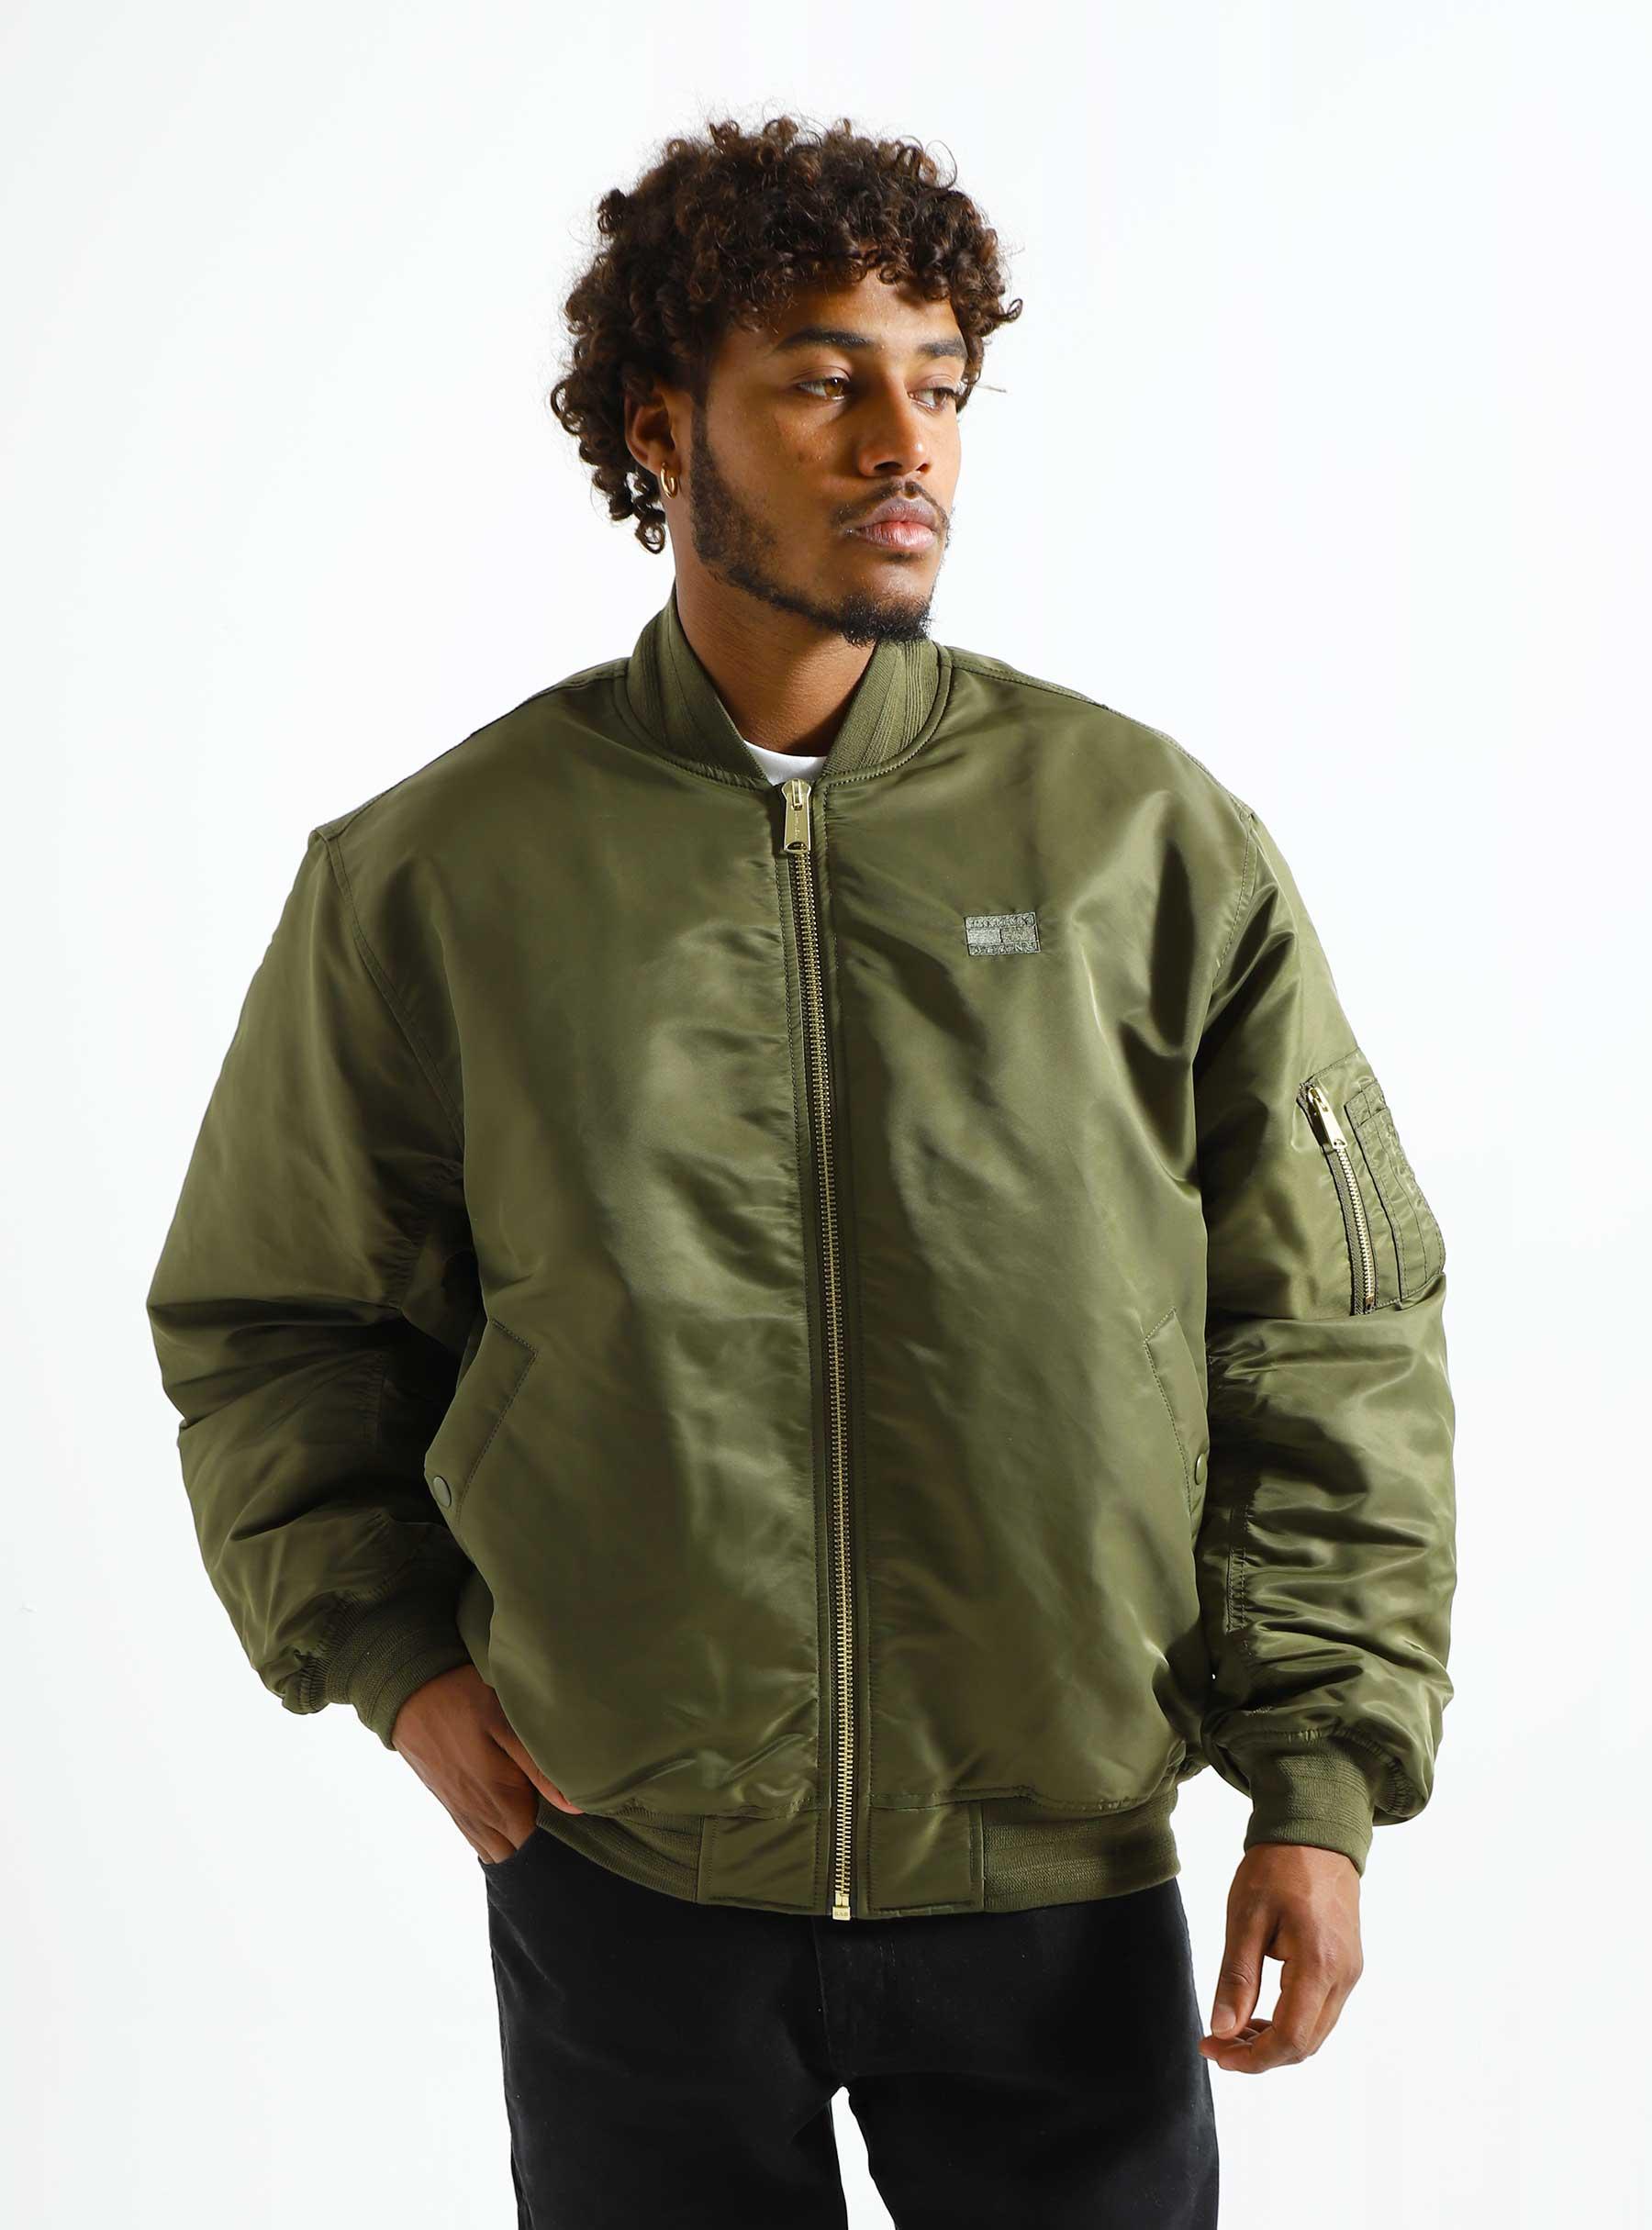 Tommy Jeans Army - Green Olive Drab Freshcotton Jacket Authentic TJM